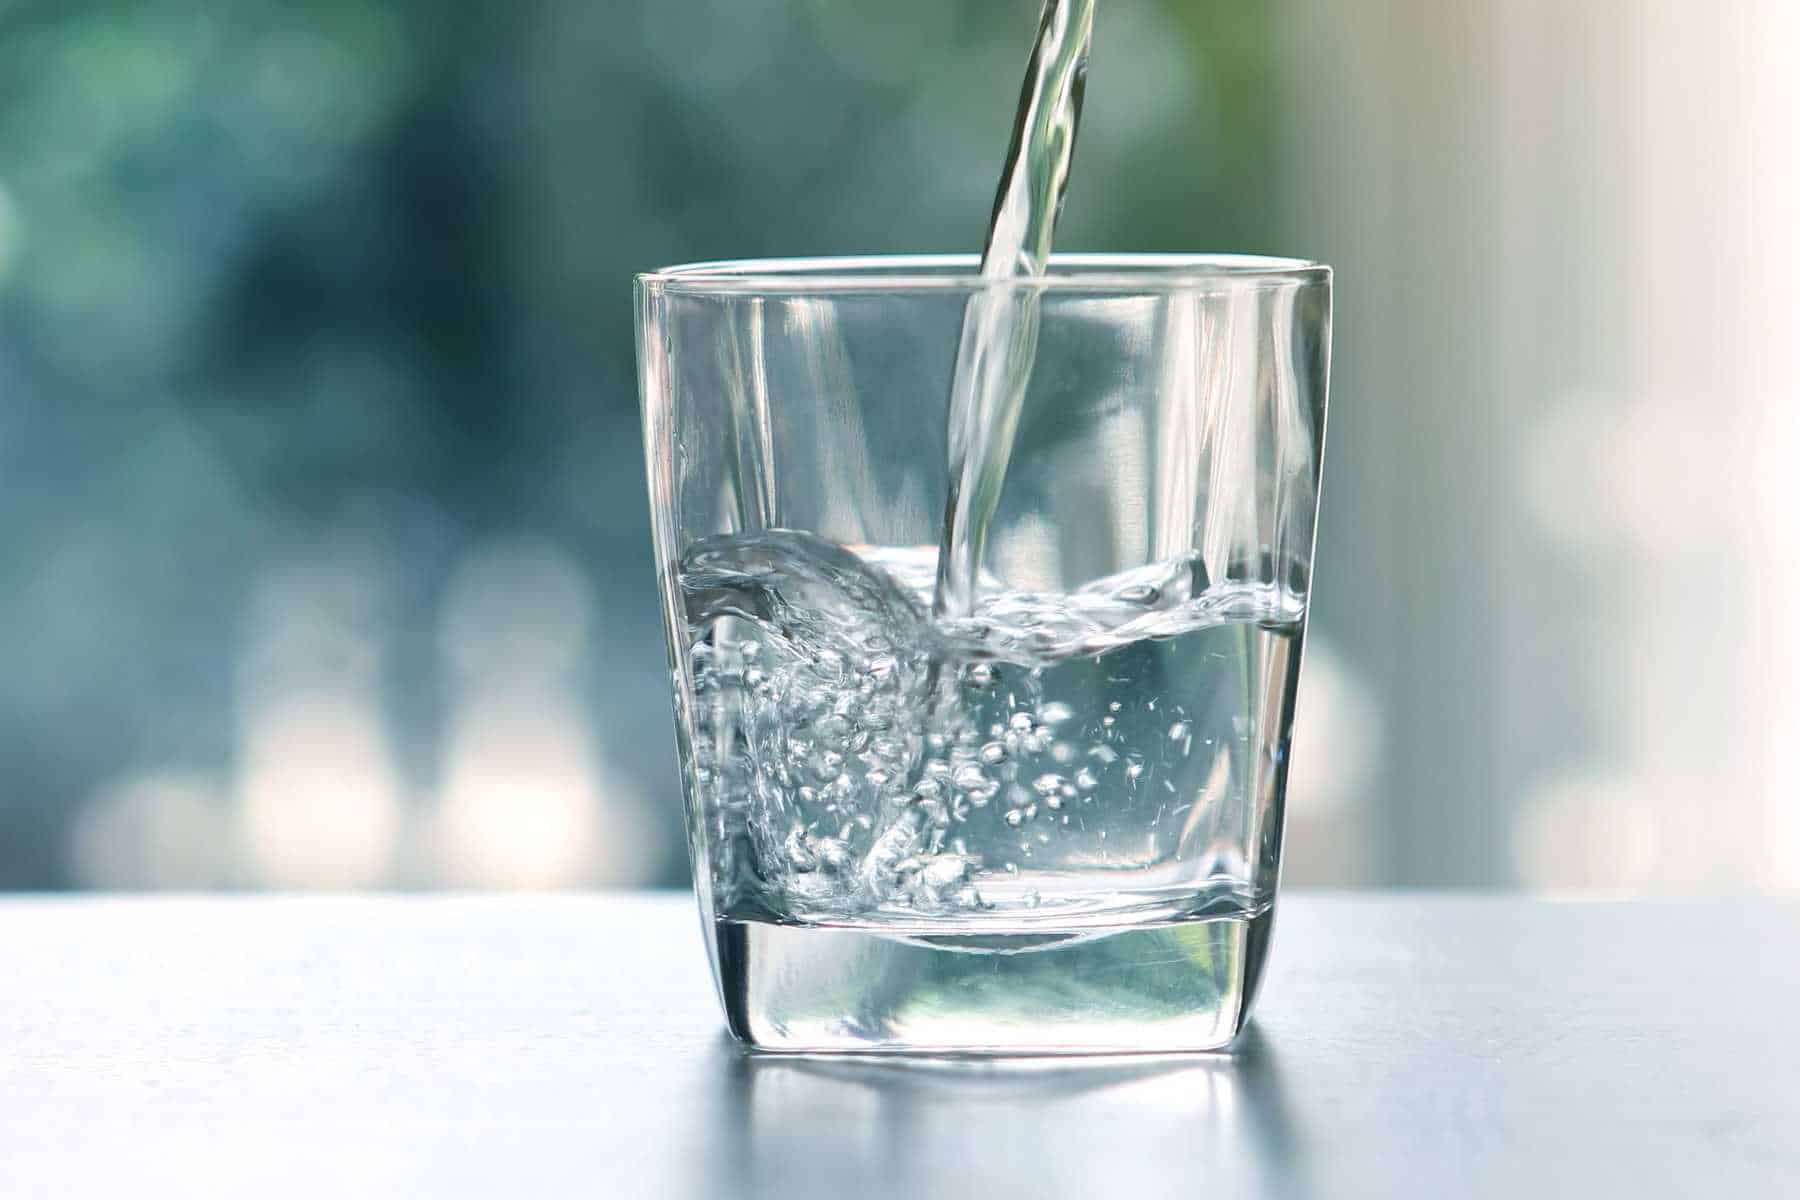 How to filter water for safe drinking